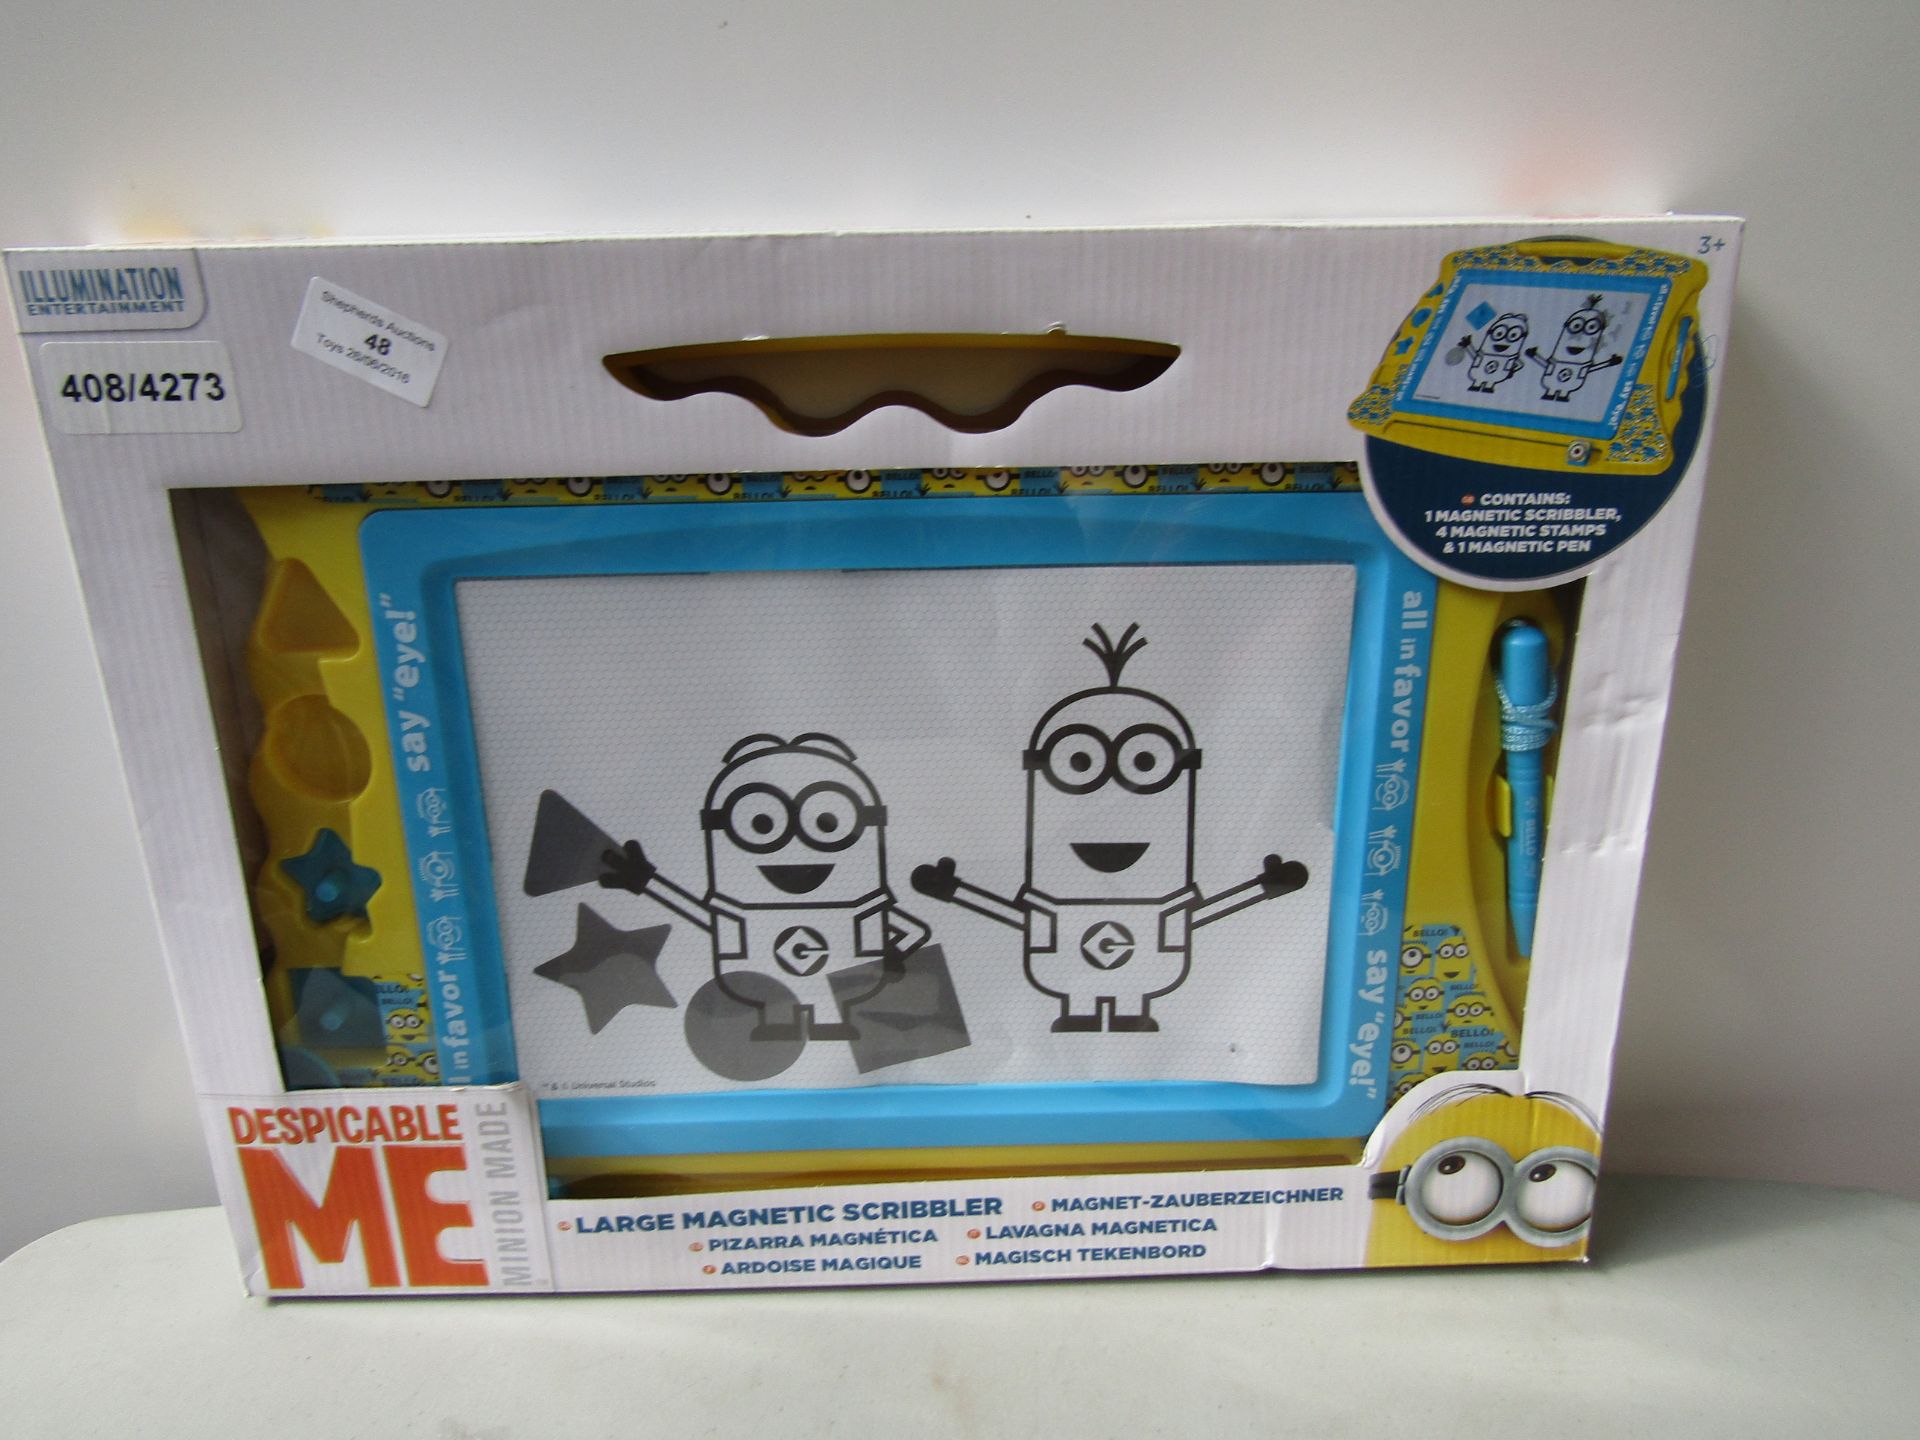 Despicable Me Large Magnetic Scribbler. Boxed.